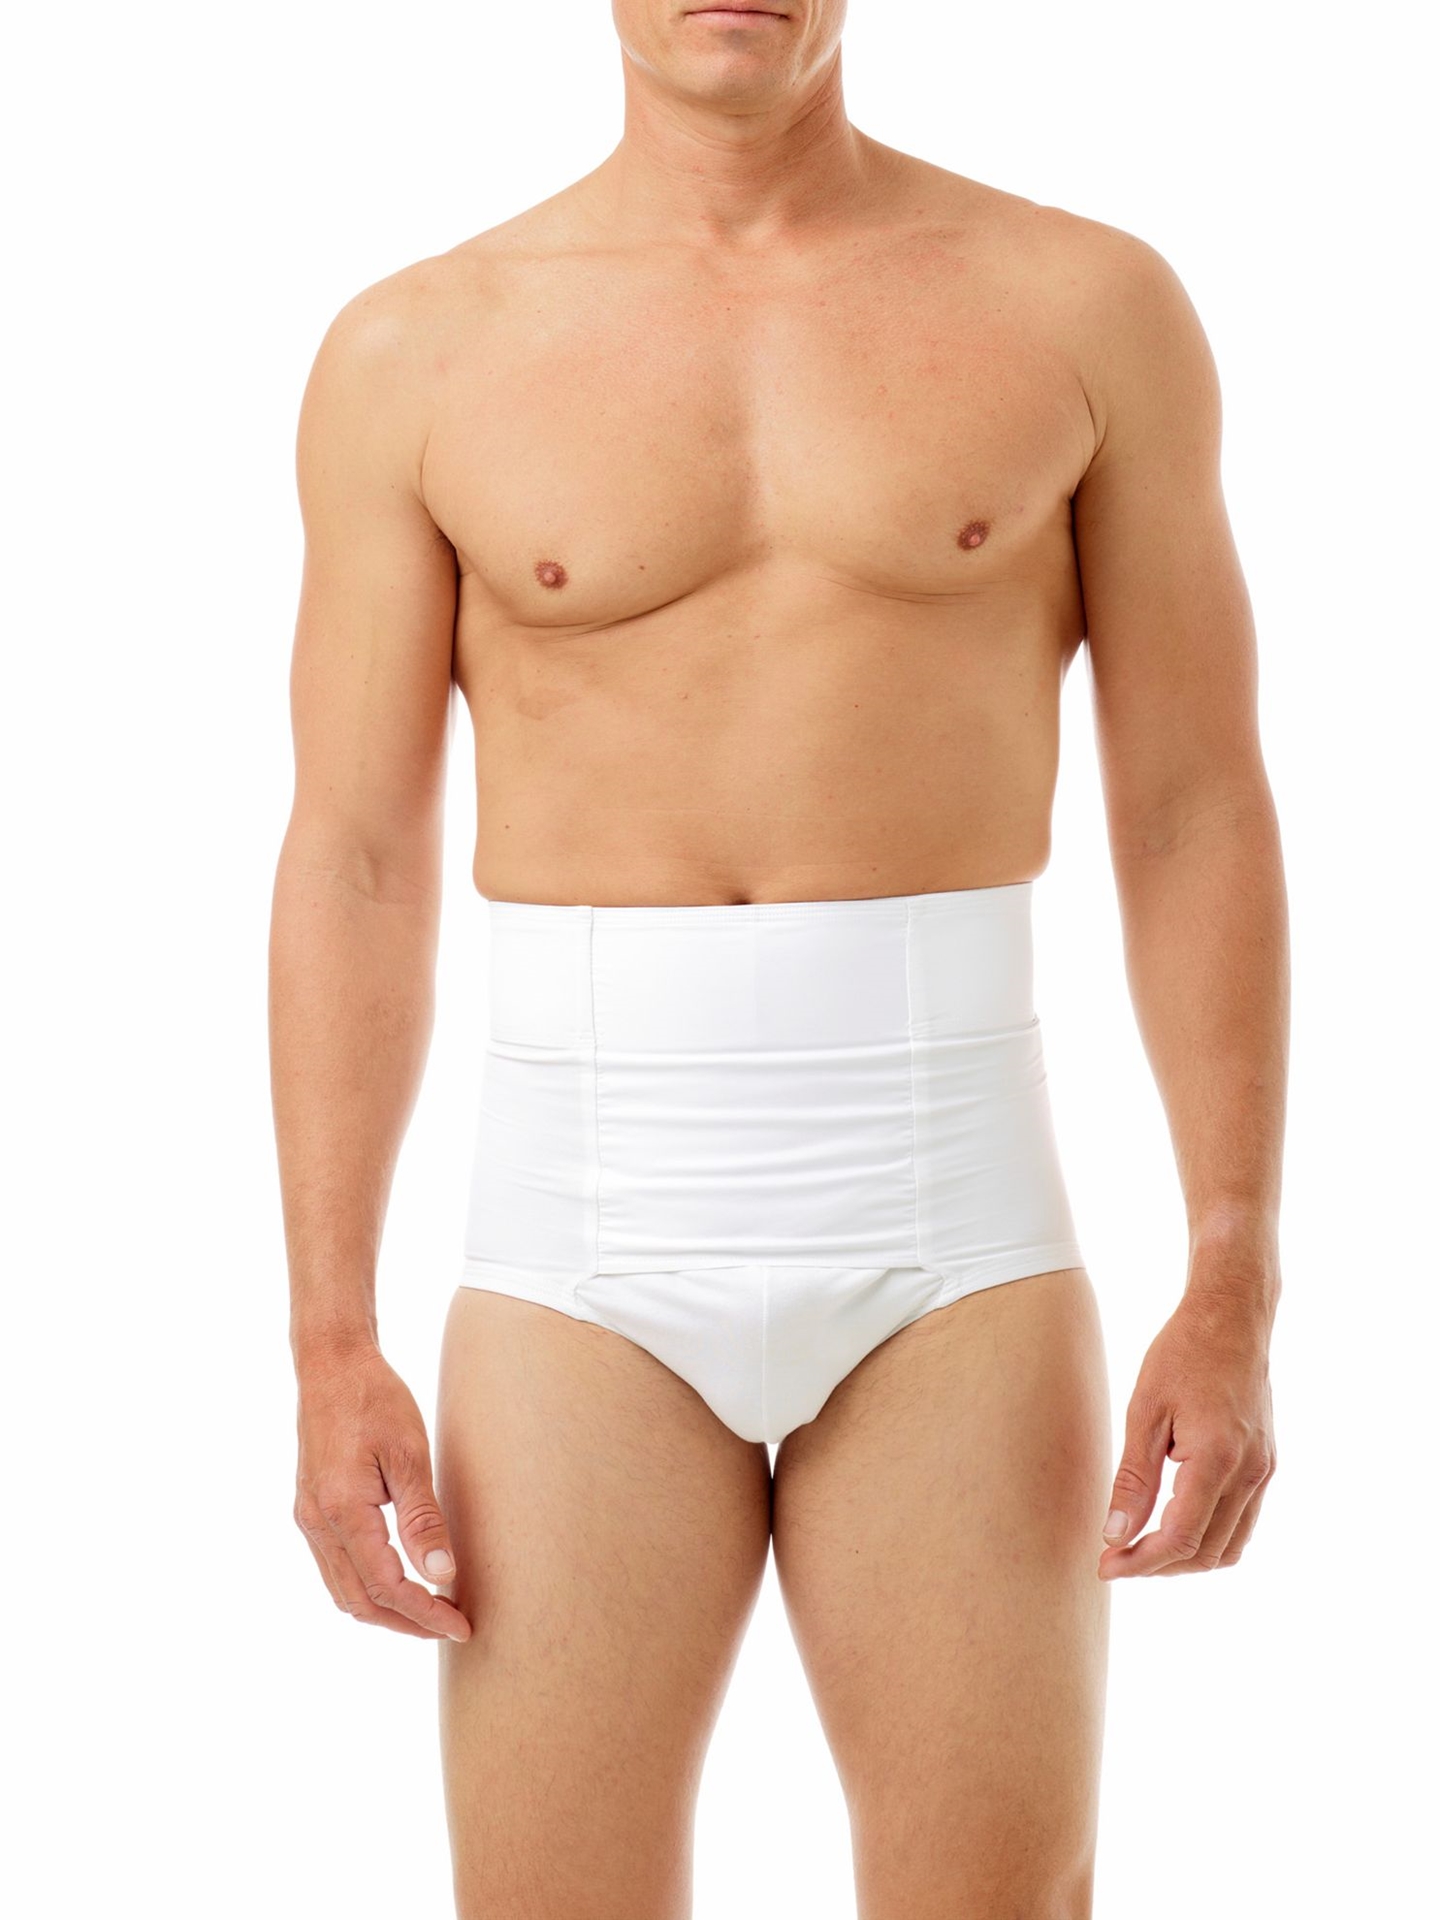 Men's 3-Inch Slip-on Girdle, Products Made in the USA